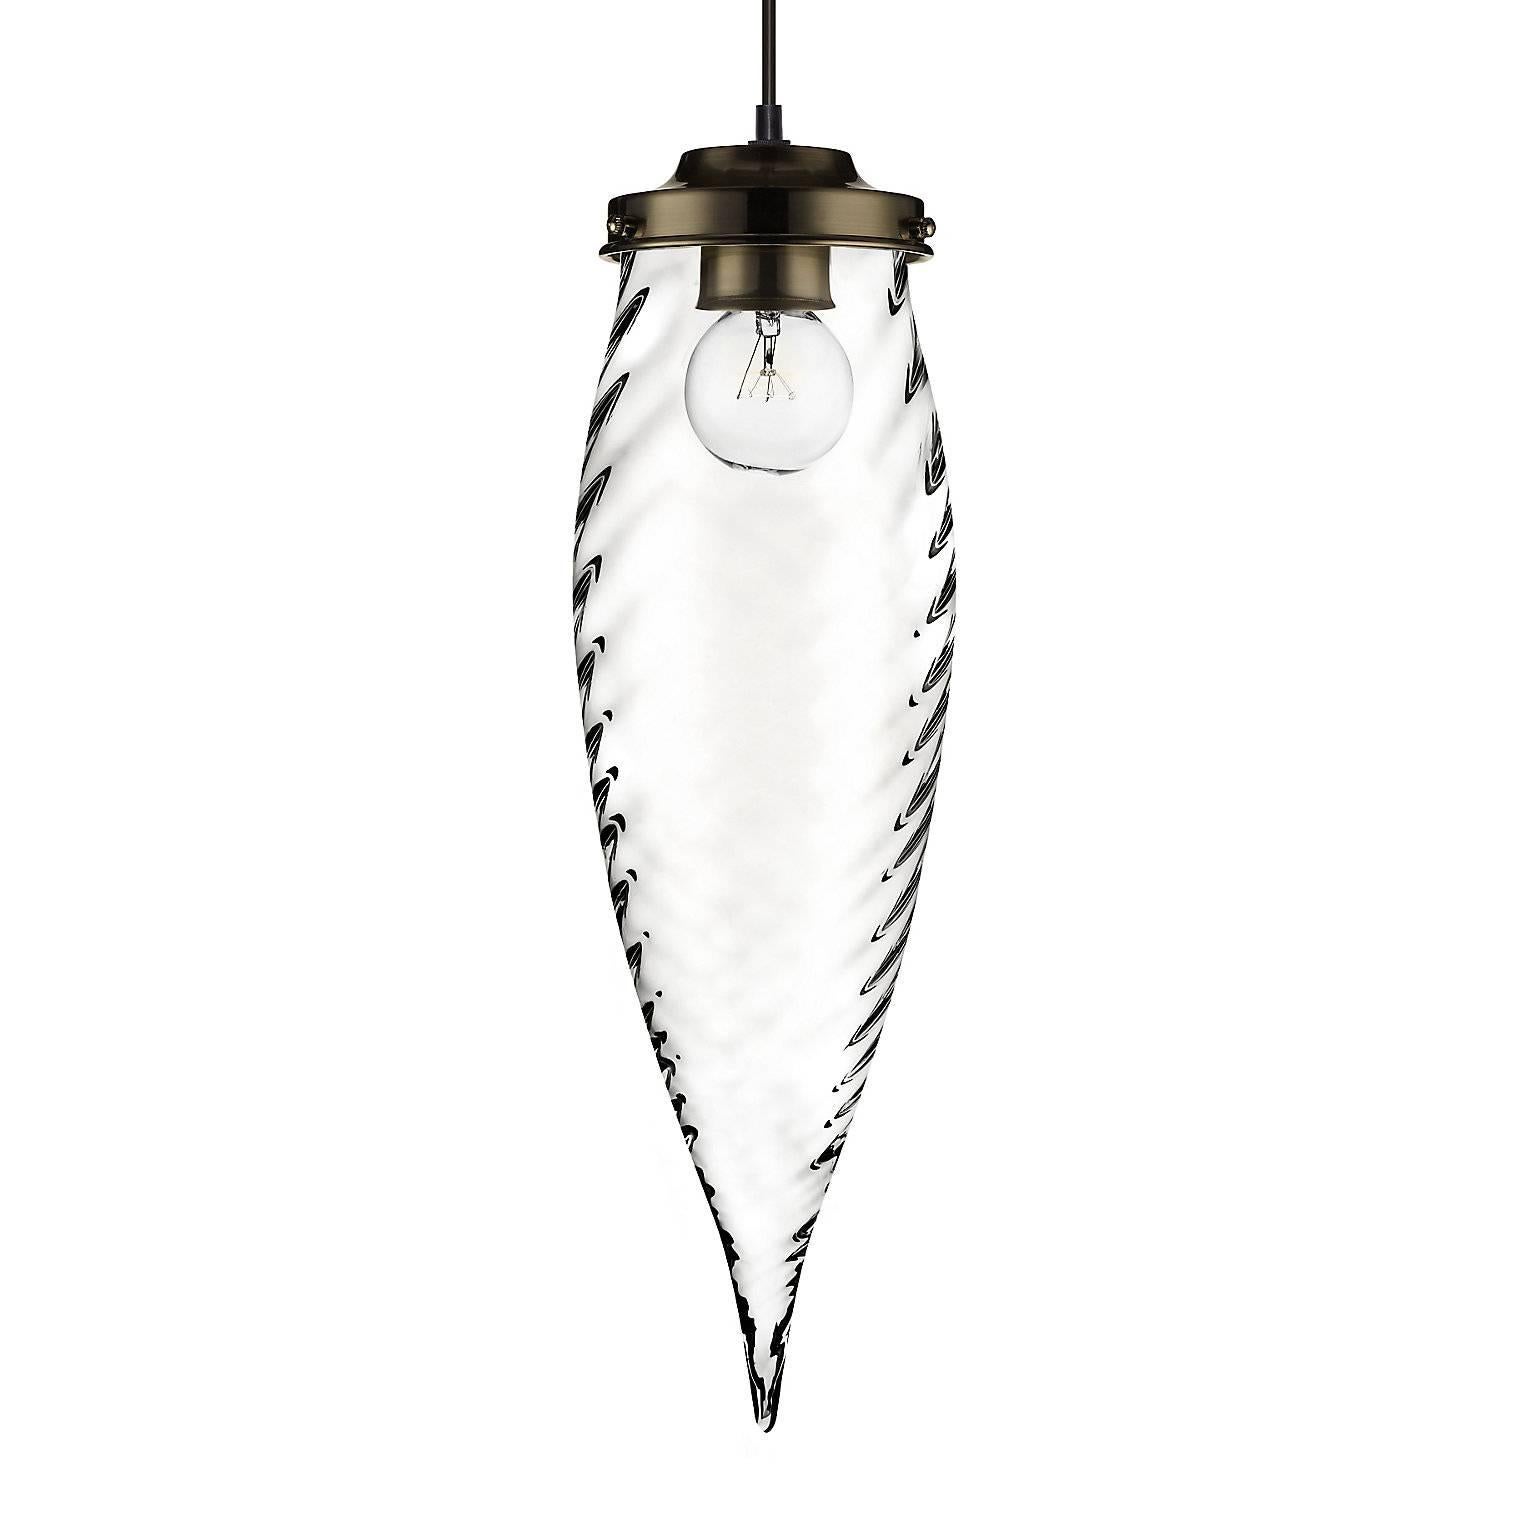 Contemporary Pointelle Petite Opaline Handblown Modern Glass Pendant Light, Made in the USA For Sale